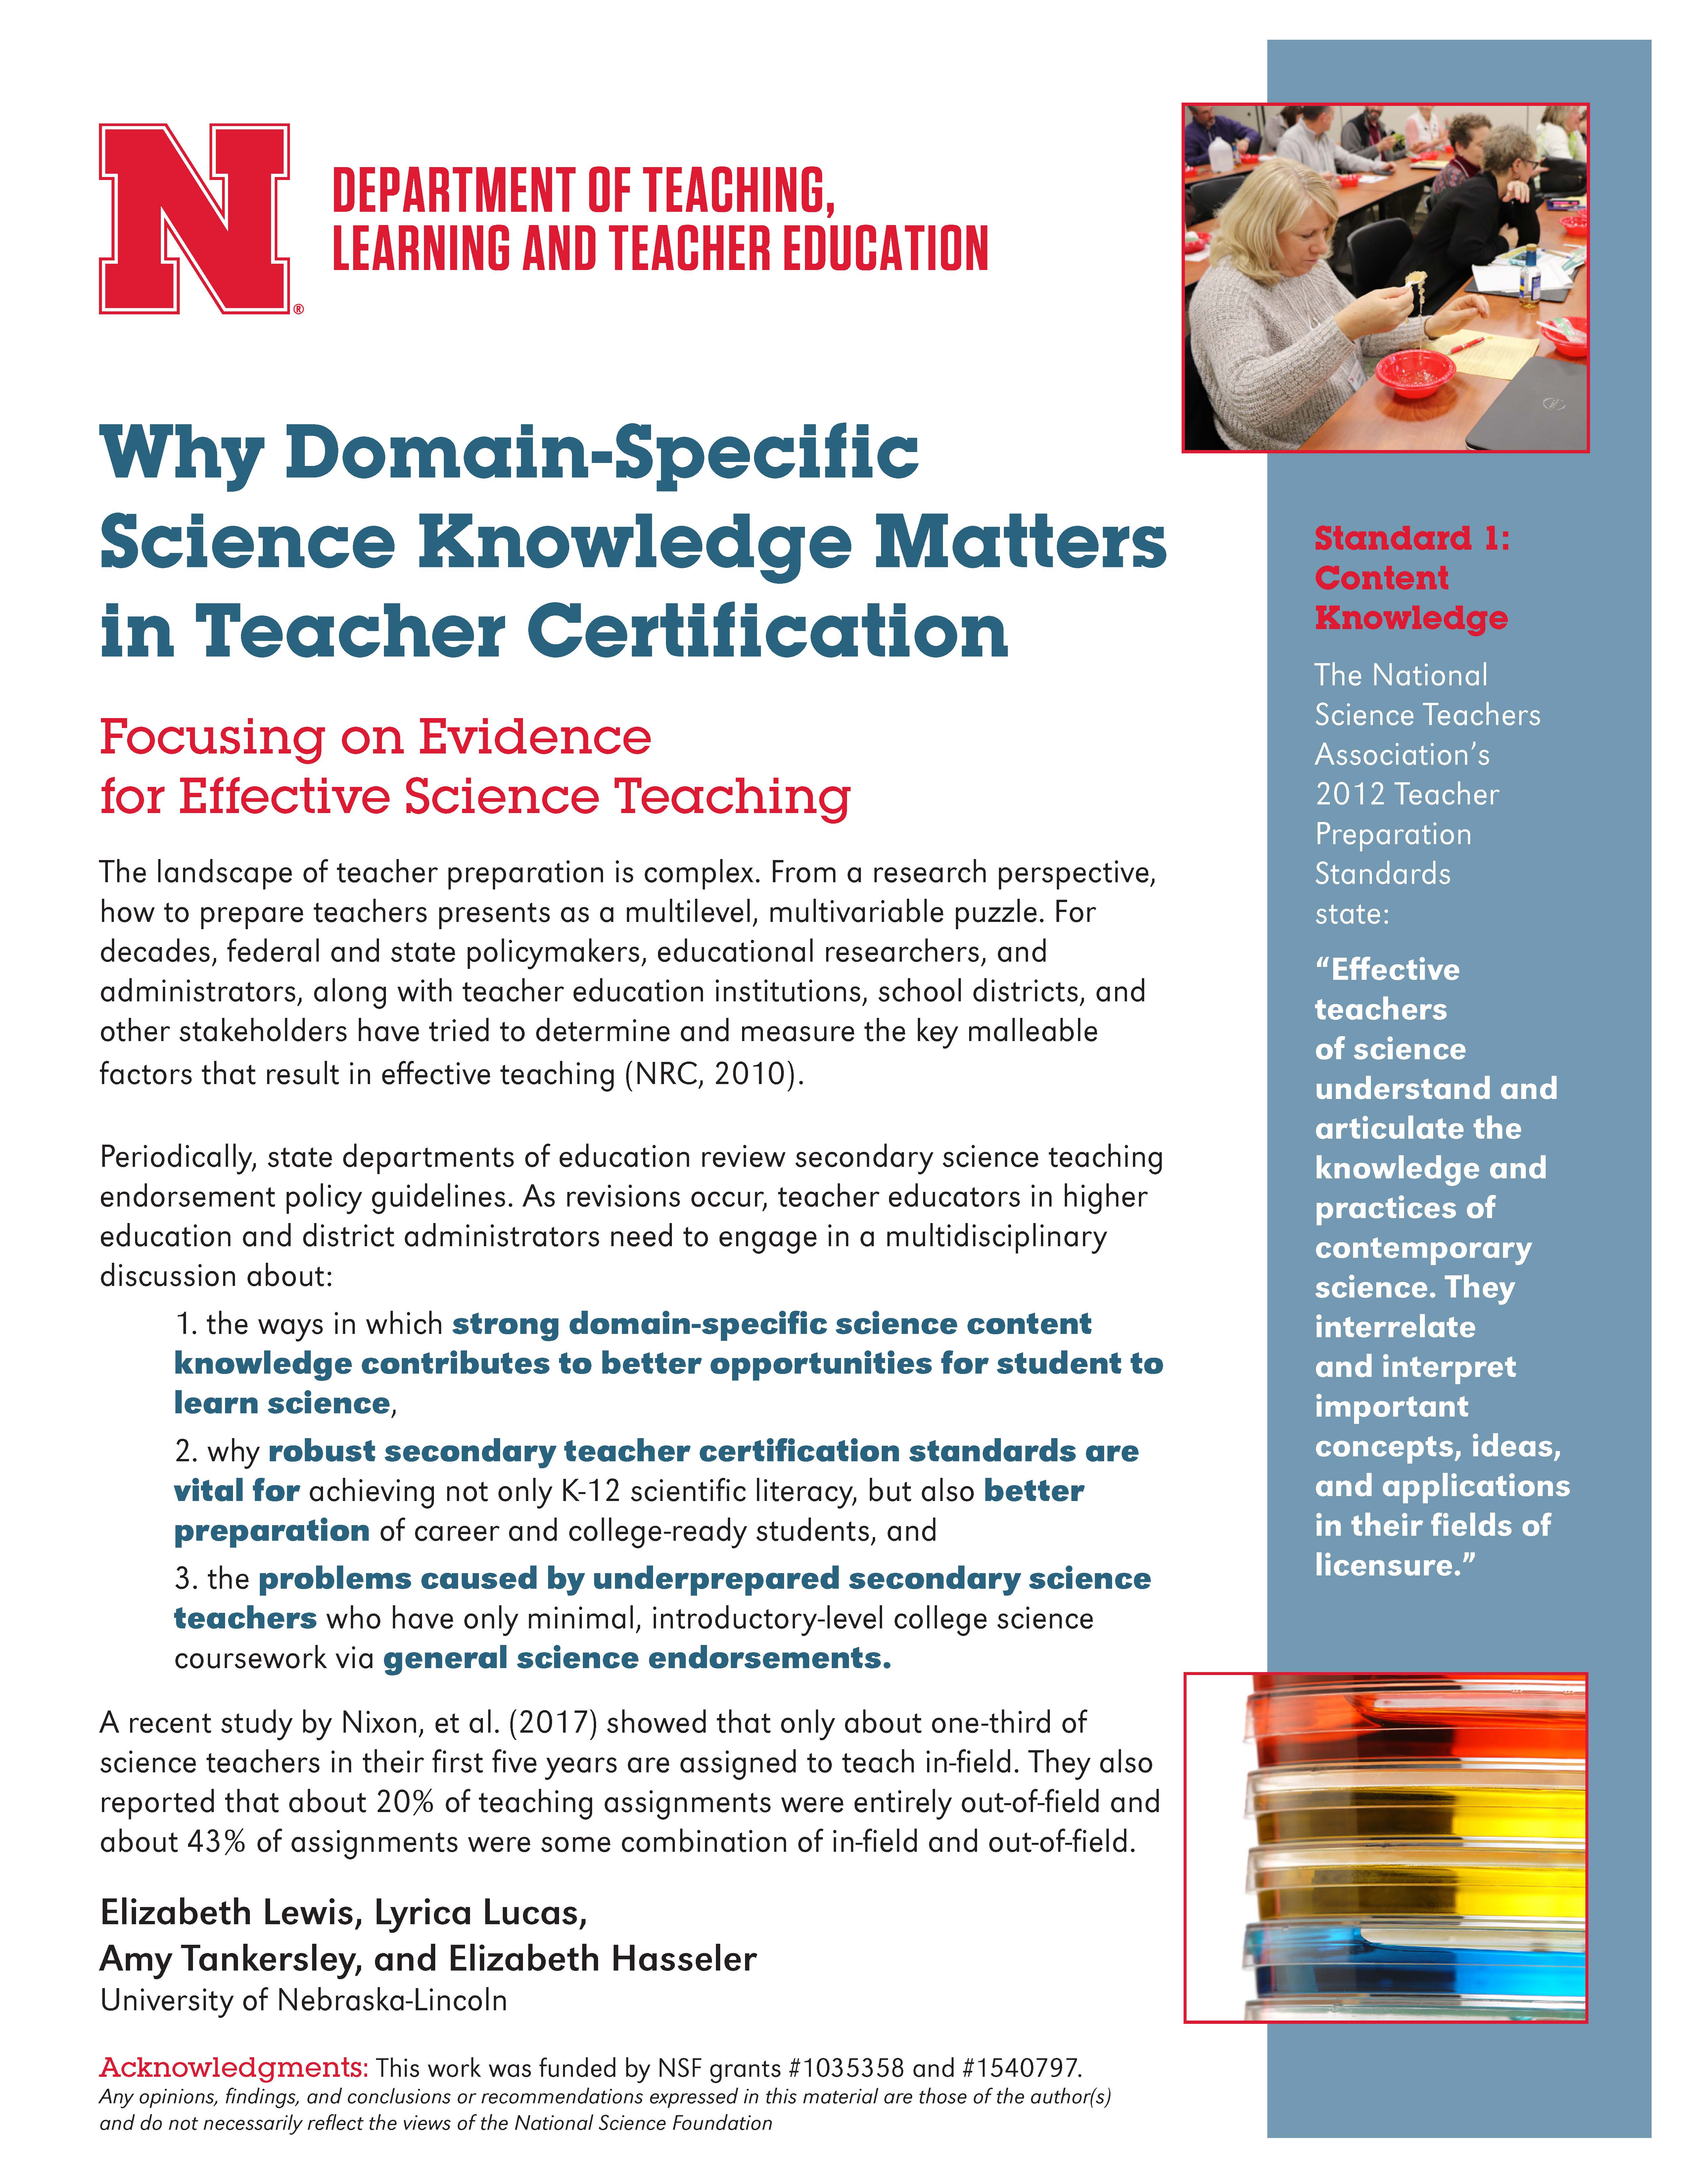 Why Domain-Specific Science Knowledge Matters in Teacher Certification